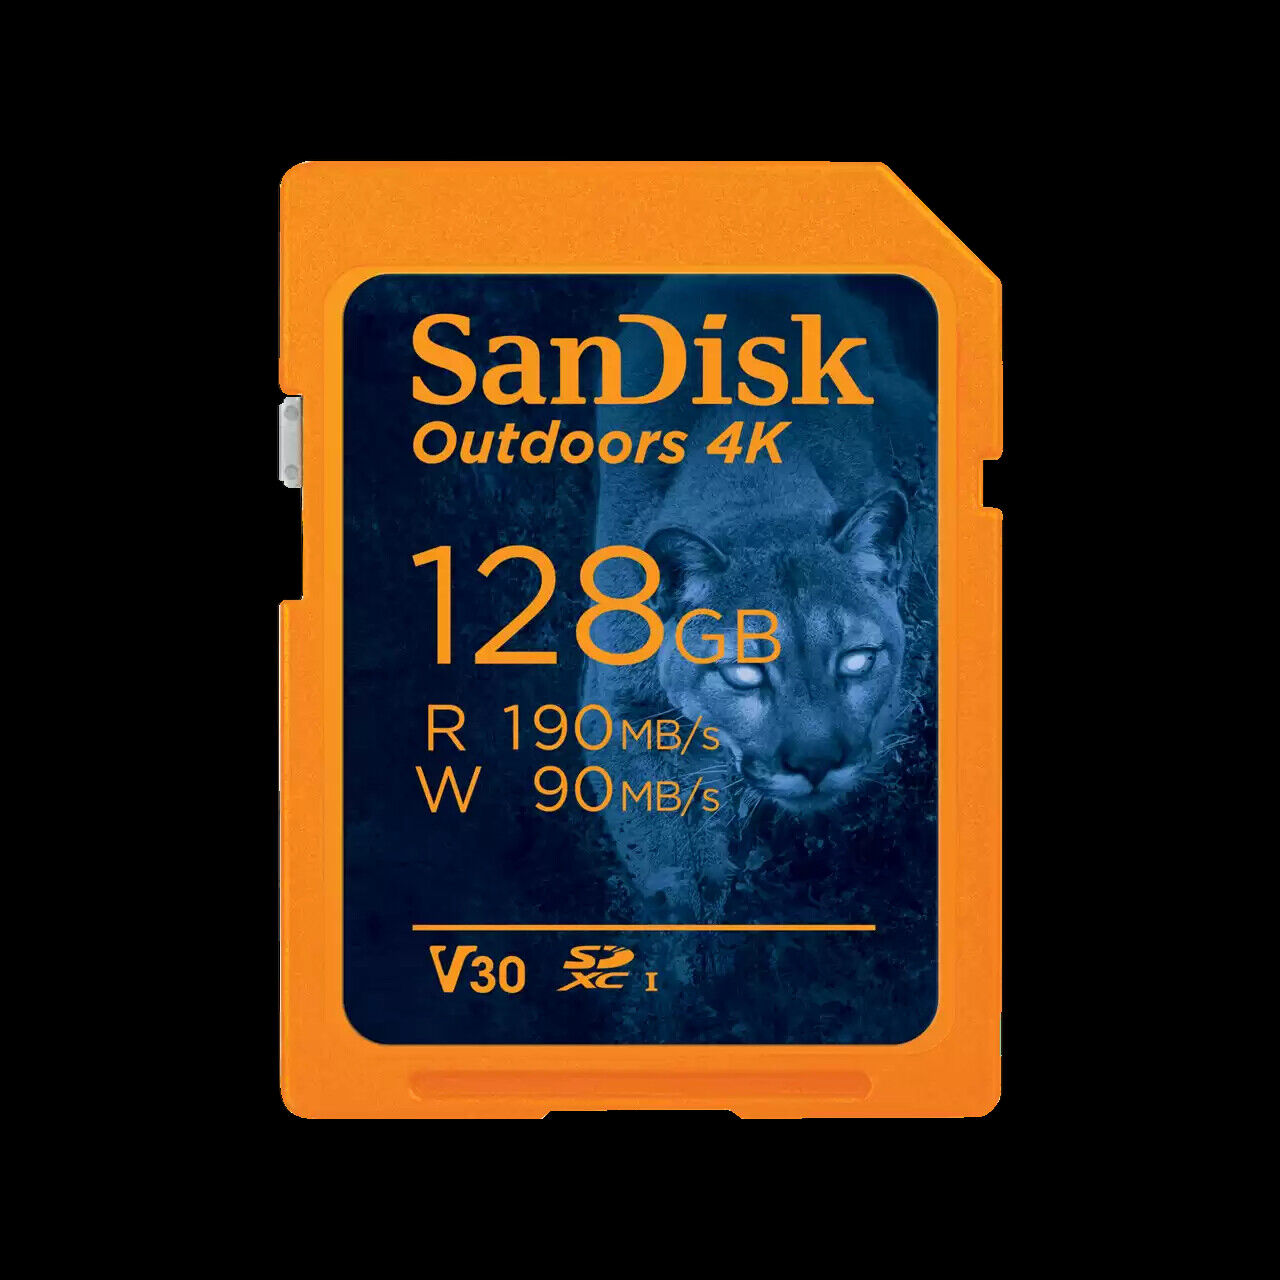 SanDisk 128GB Outdoors 4K SD UHS-I SDXC Memory Card - SDSDXWA-128G-GN6VN